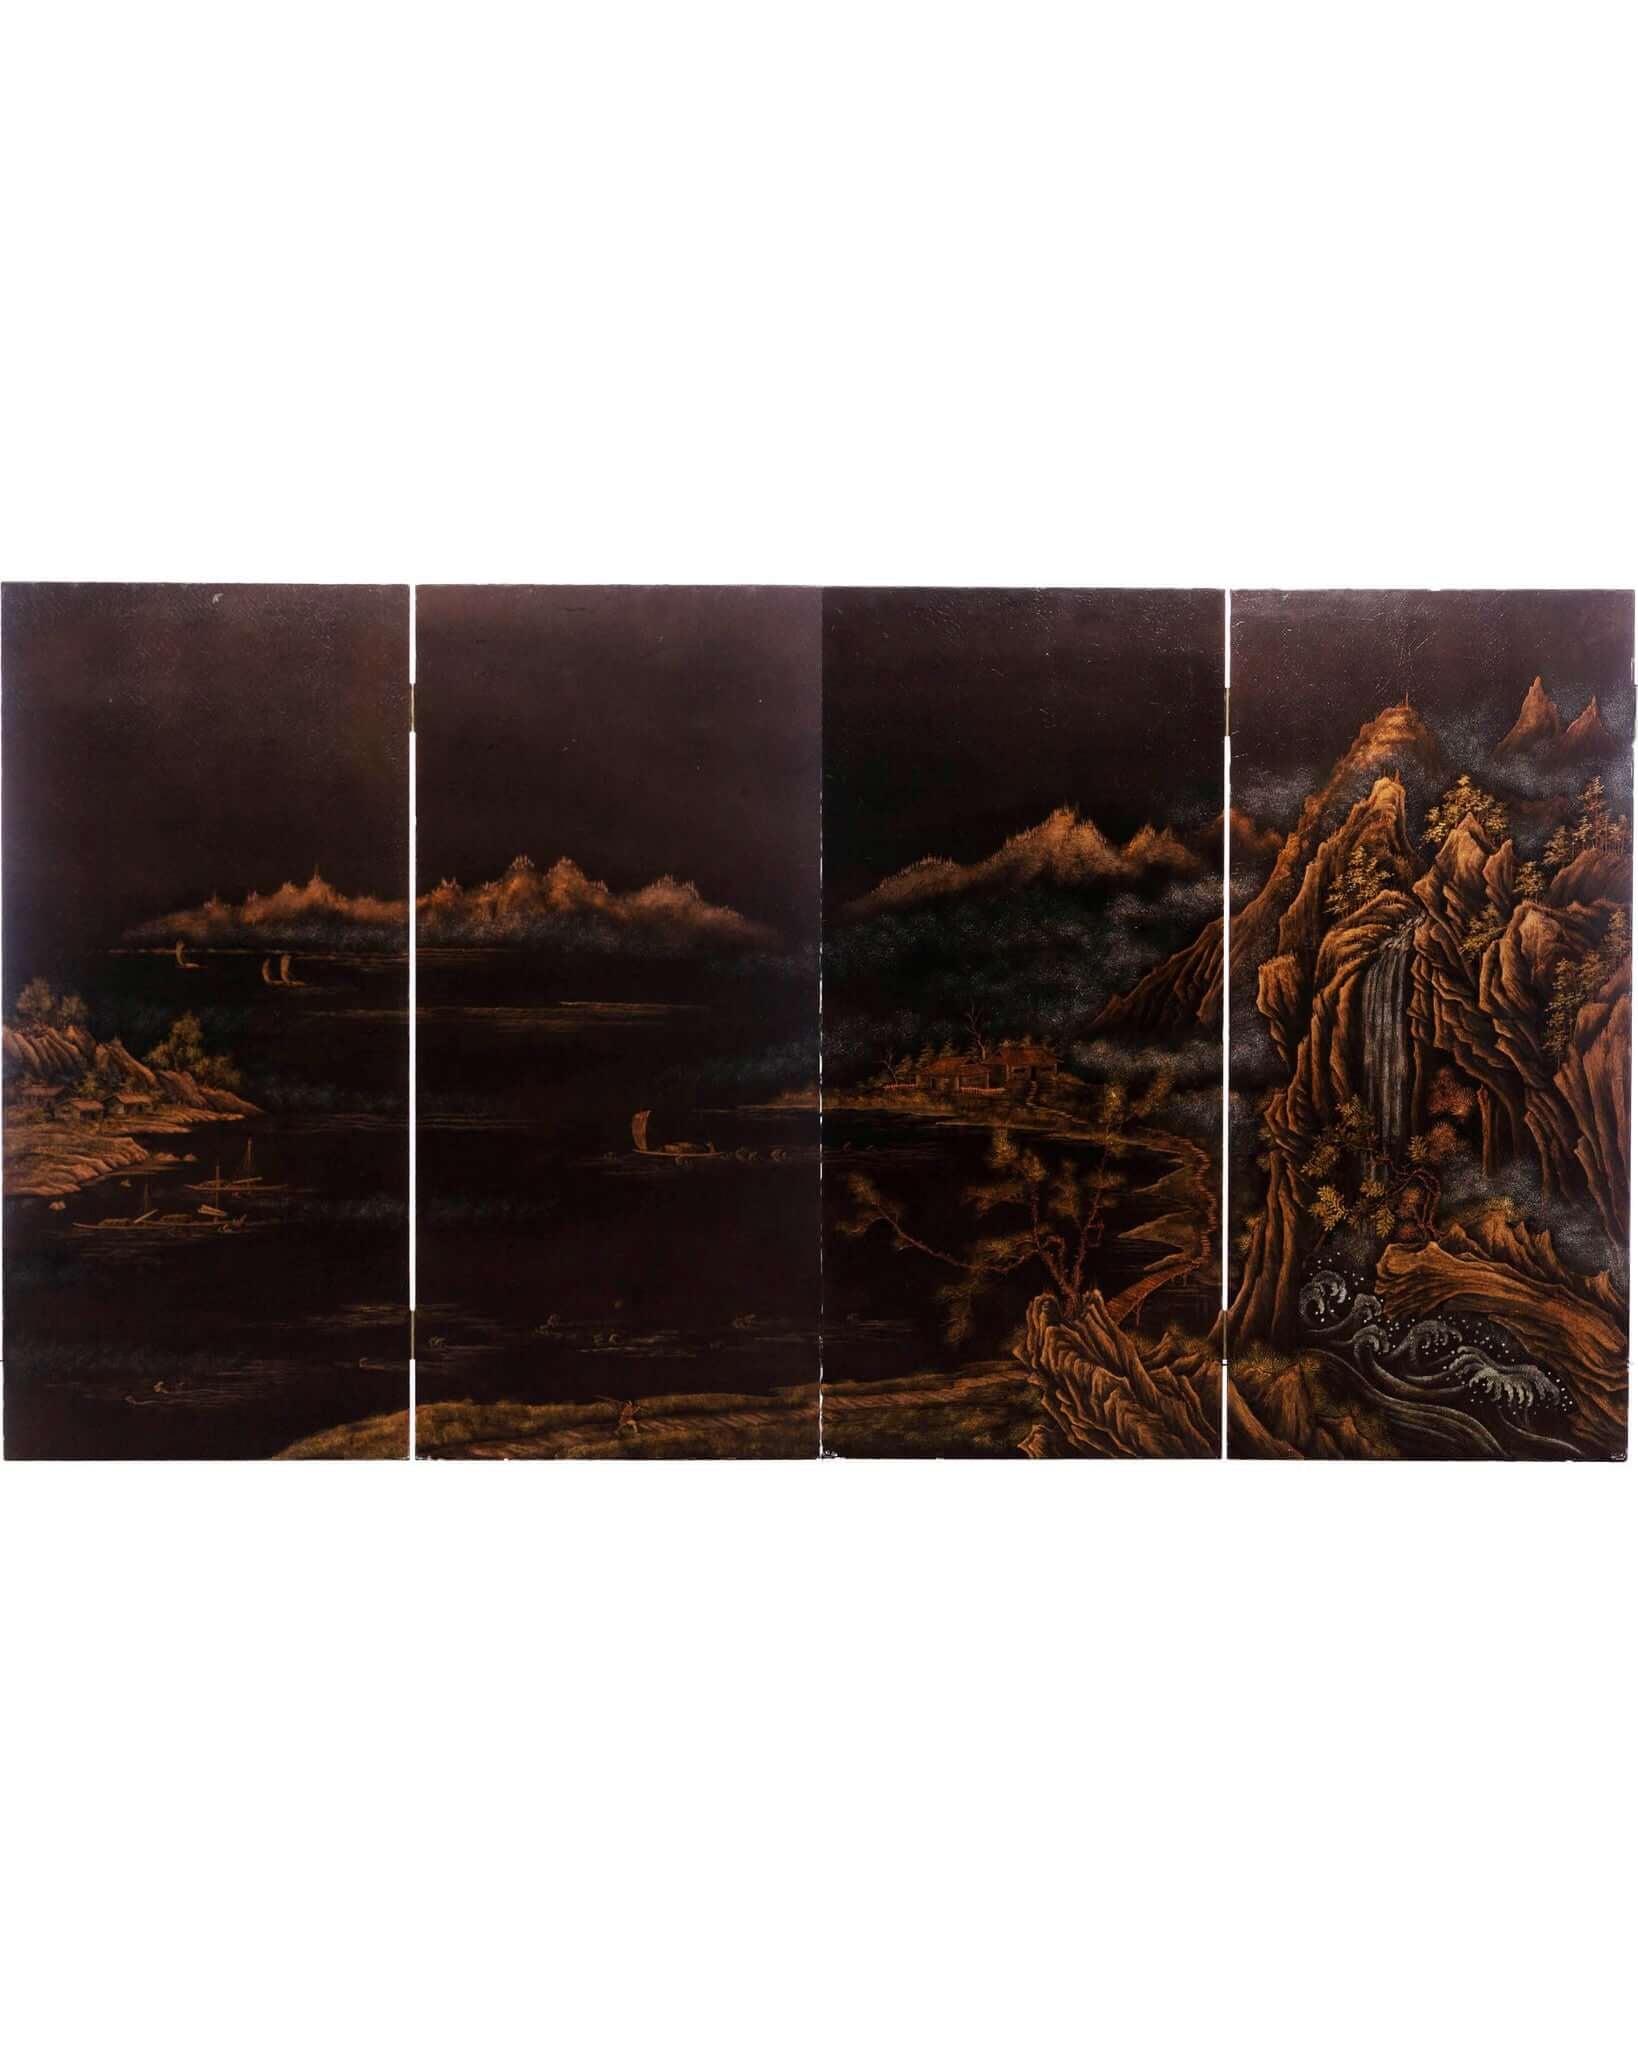 Lawrence & Scott "City of Guilin" Leather on Wood 4-Panel Screen/Room Divider